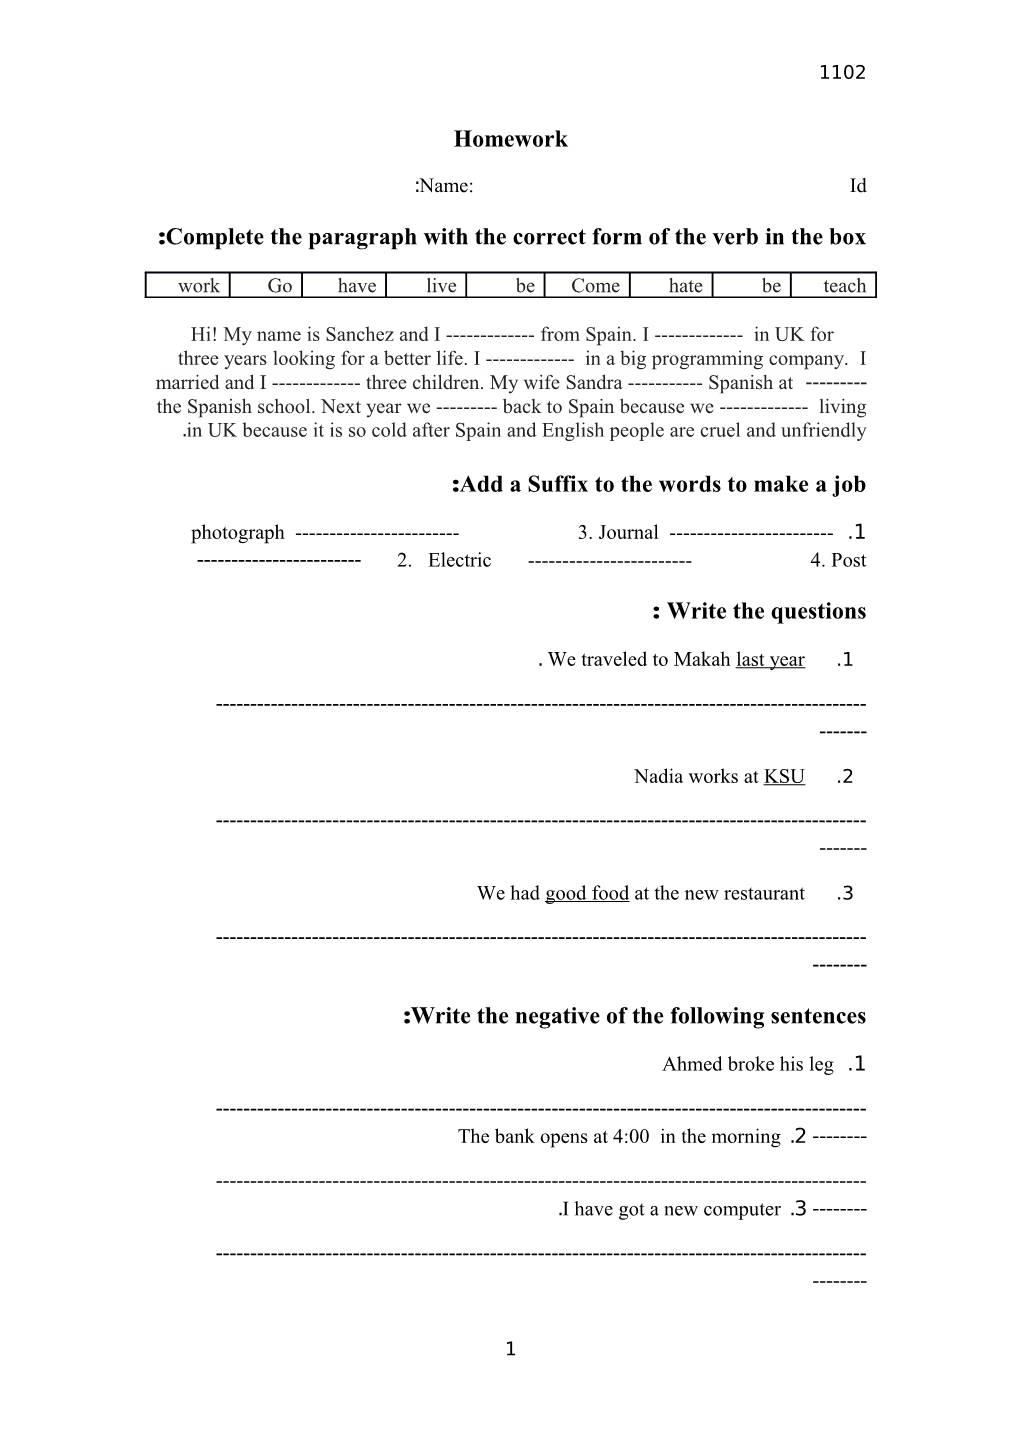 Complete the Paragraph with the Correct Form of the Verb in the Box